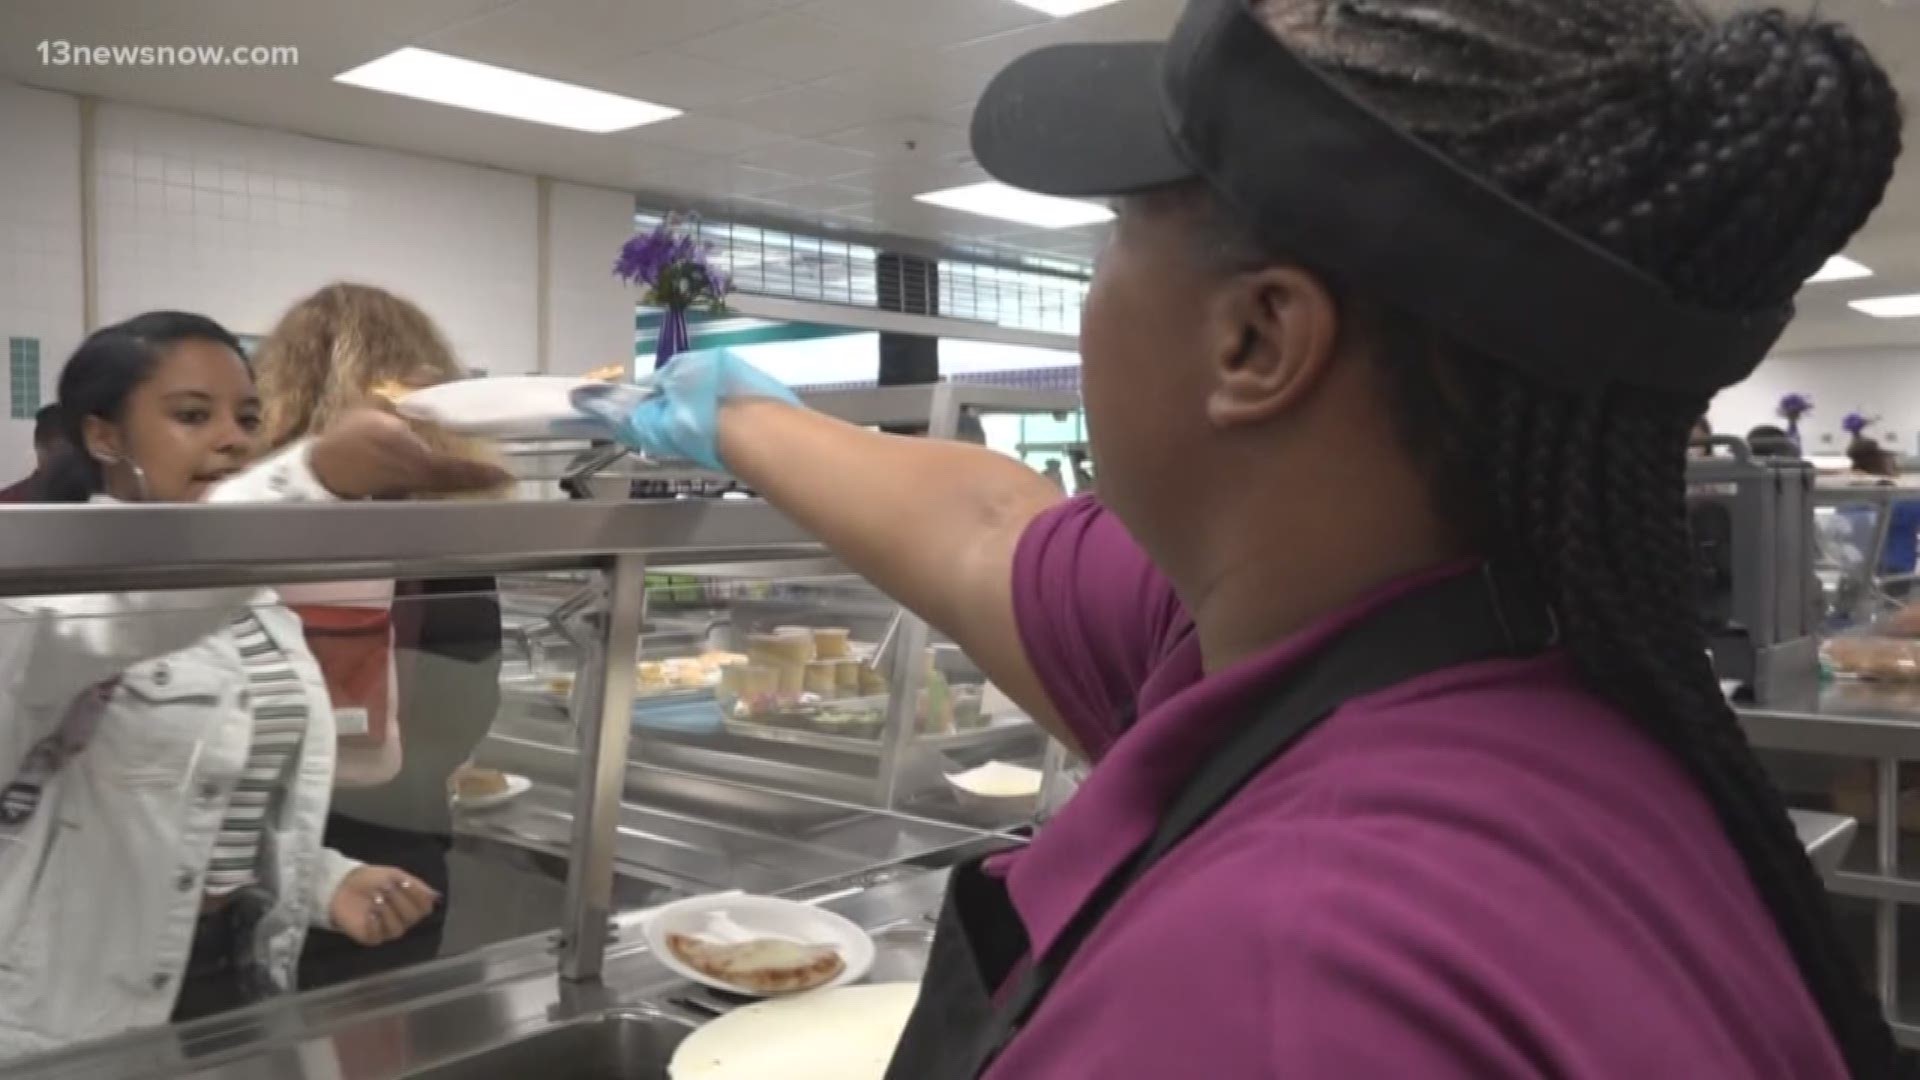 For the 2019-2020 school year in Newport News, students are getting free breakfast and lunch. It's at all Newport News Public Schools.